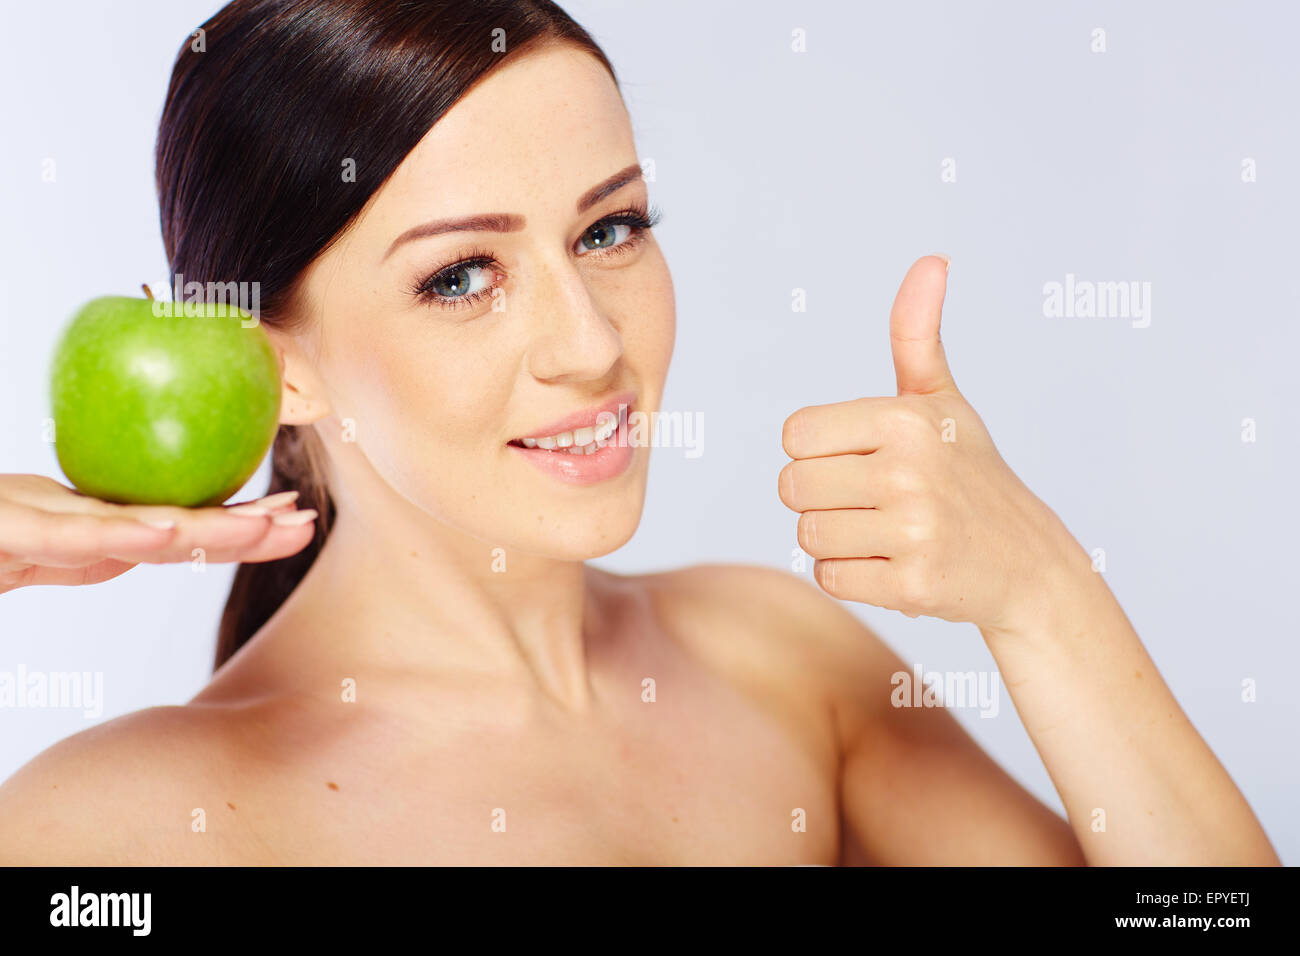 woman with a green apple Stock Photo